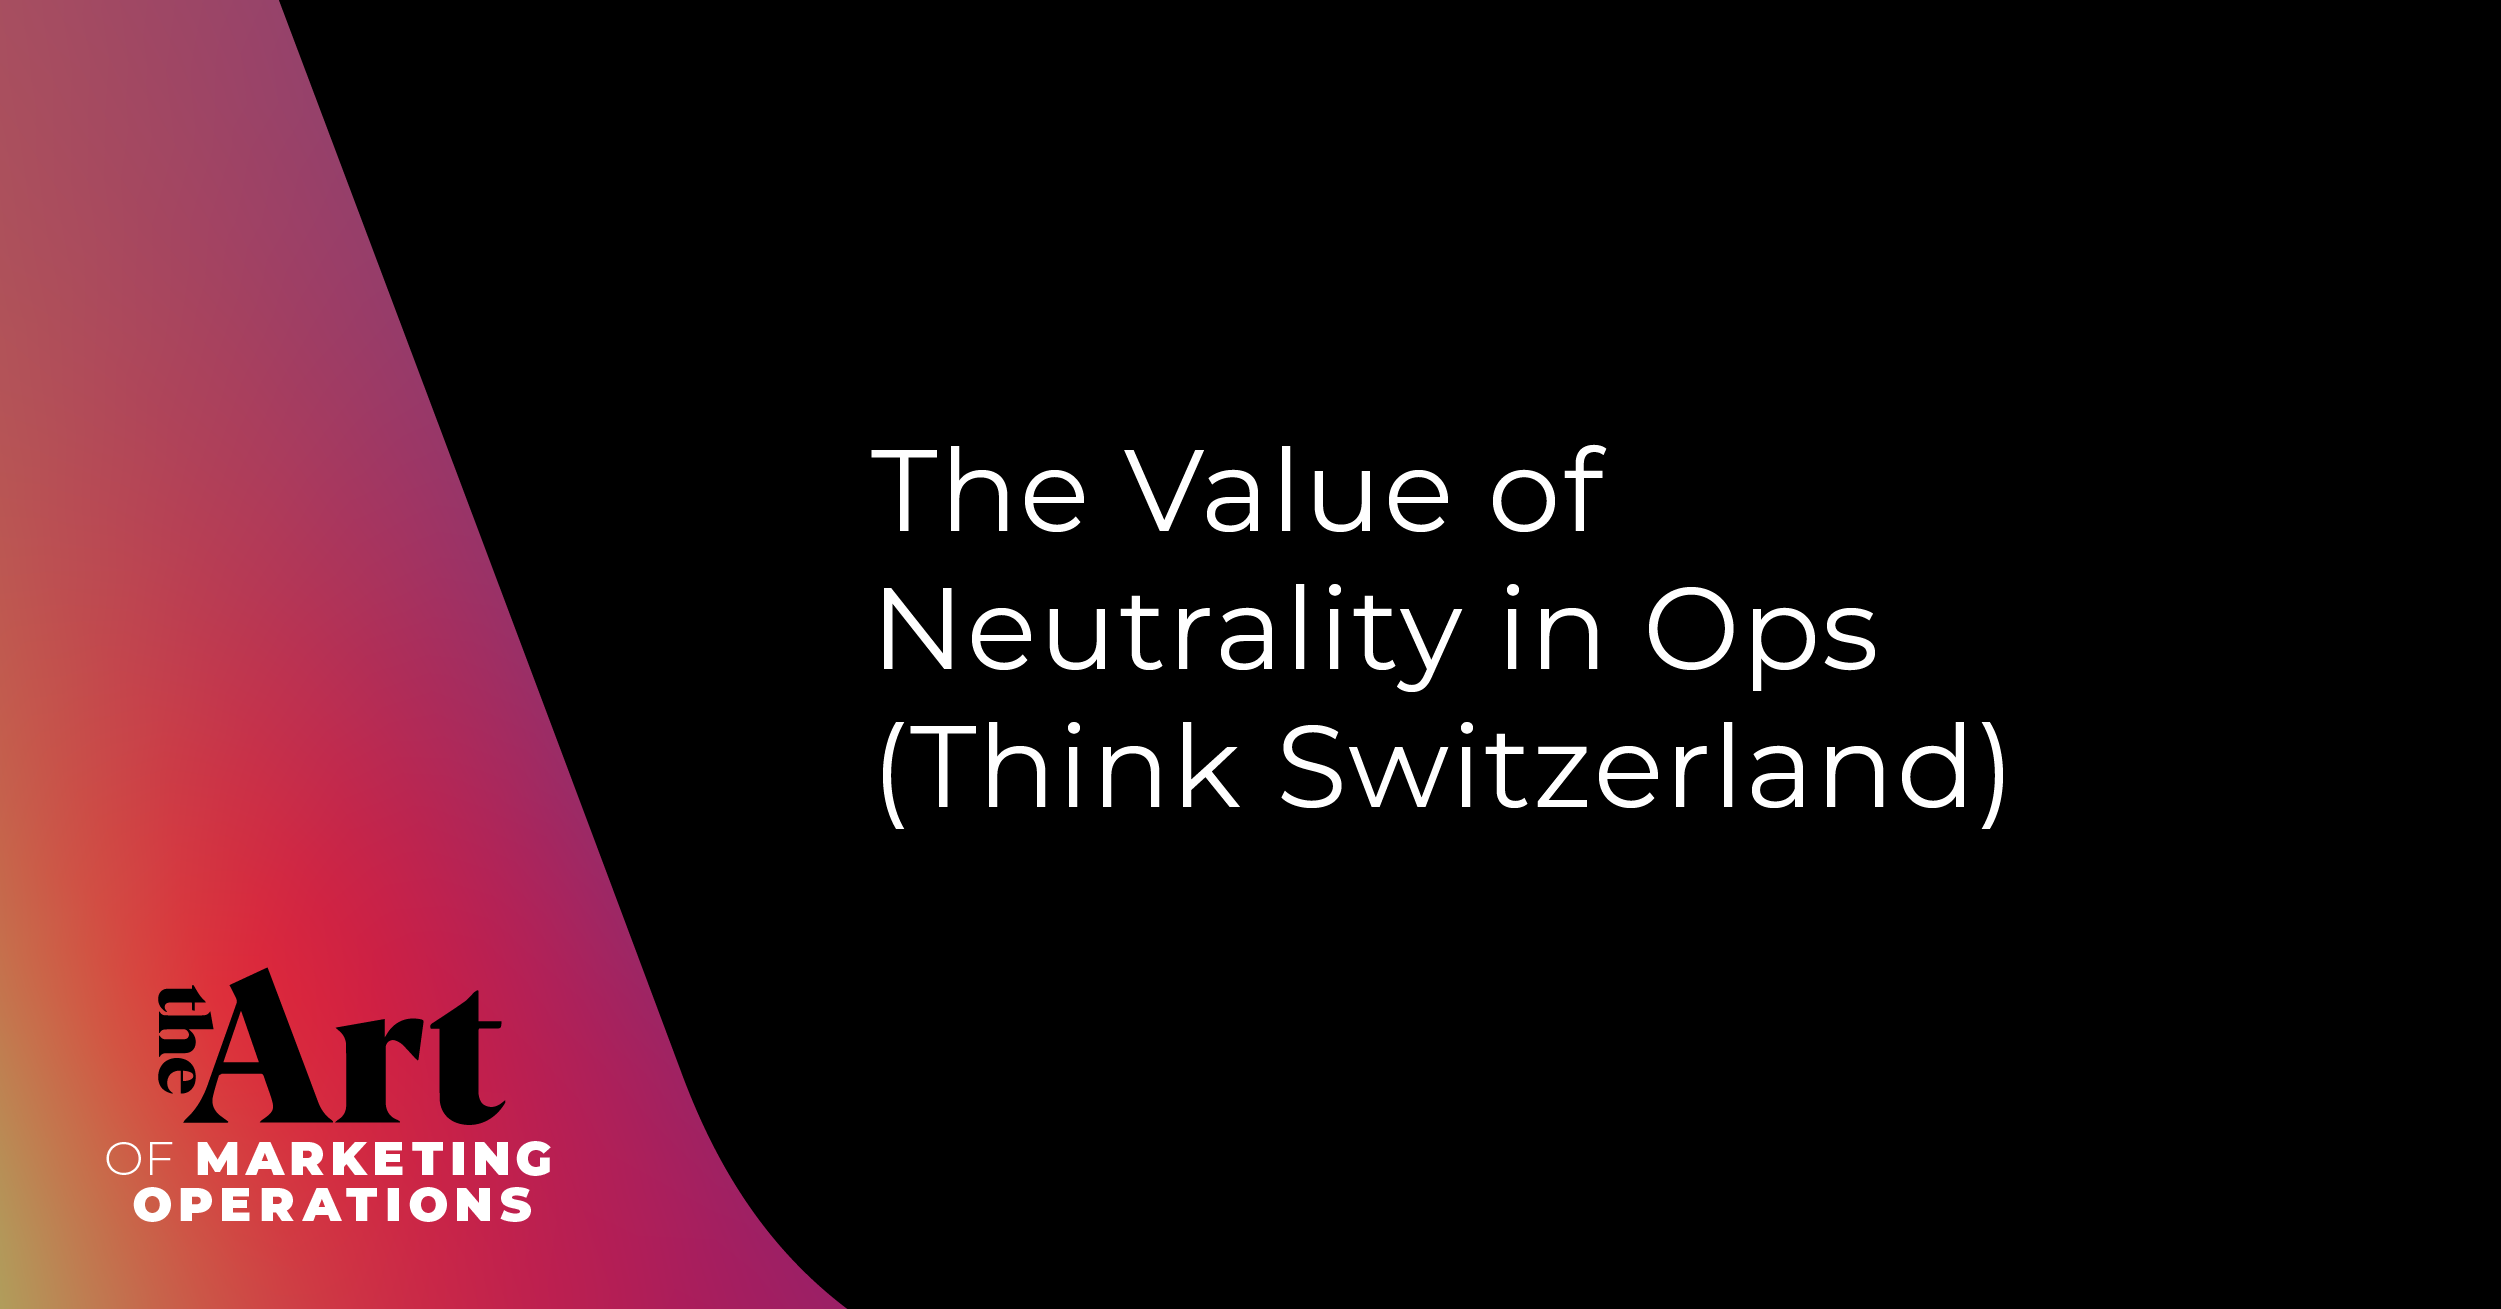 The Value of Neutrality in Ops (Think Switzerland)